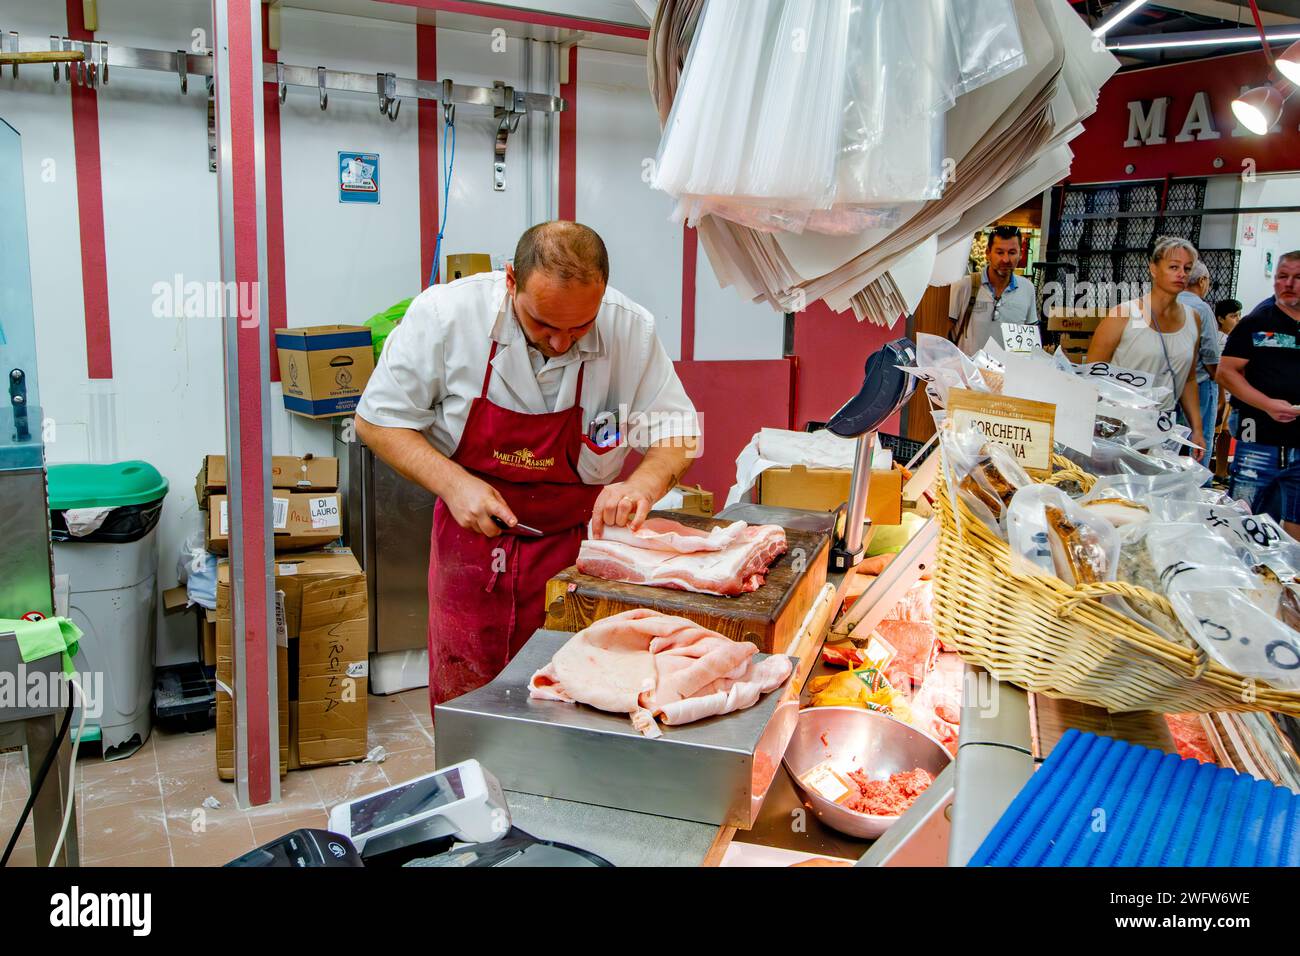 A butcher preparing a cut of meat at Florence Mercato Centrale, a busy popular fresh food and produce market in Florence, Italy Stock Photo